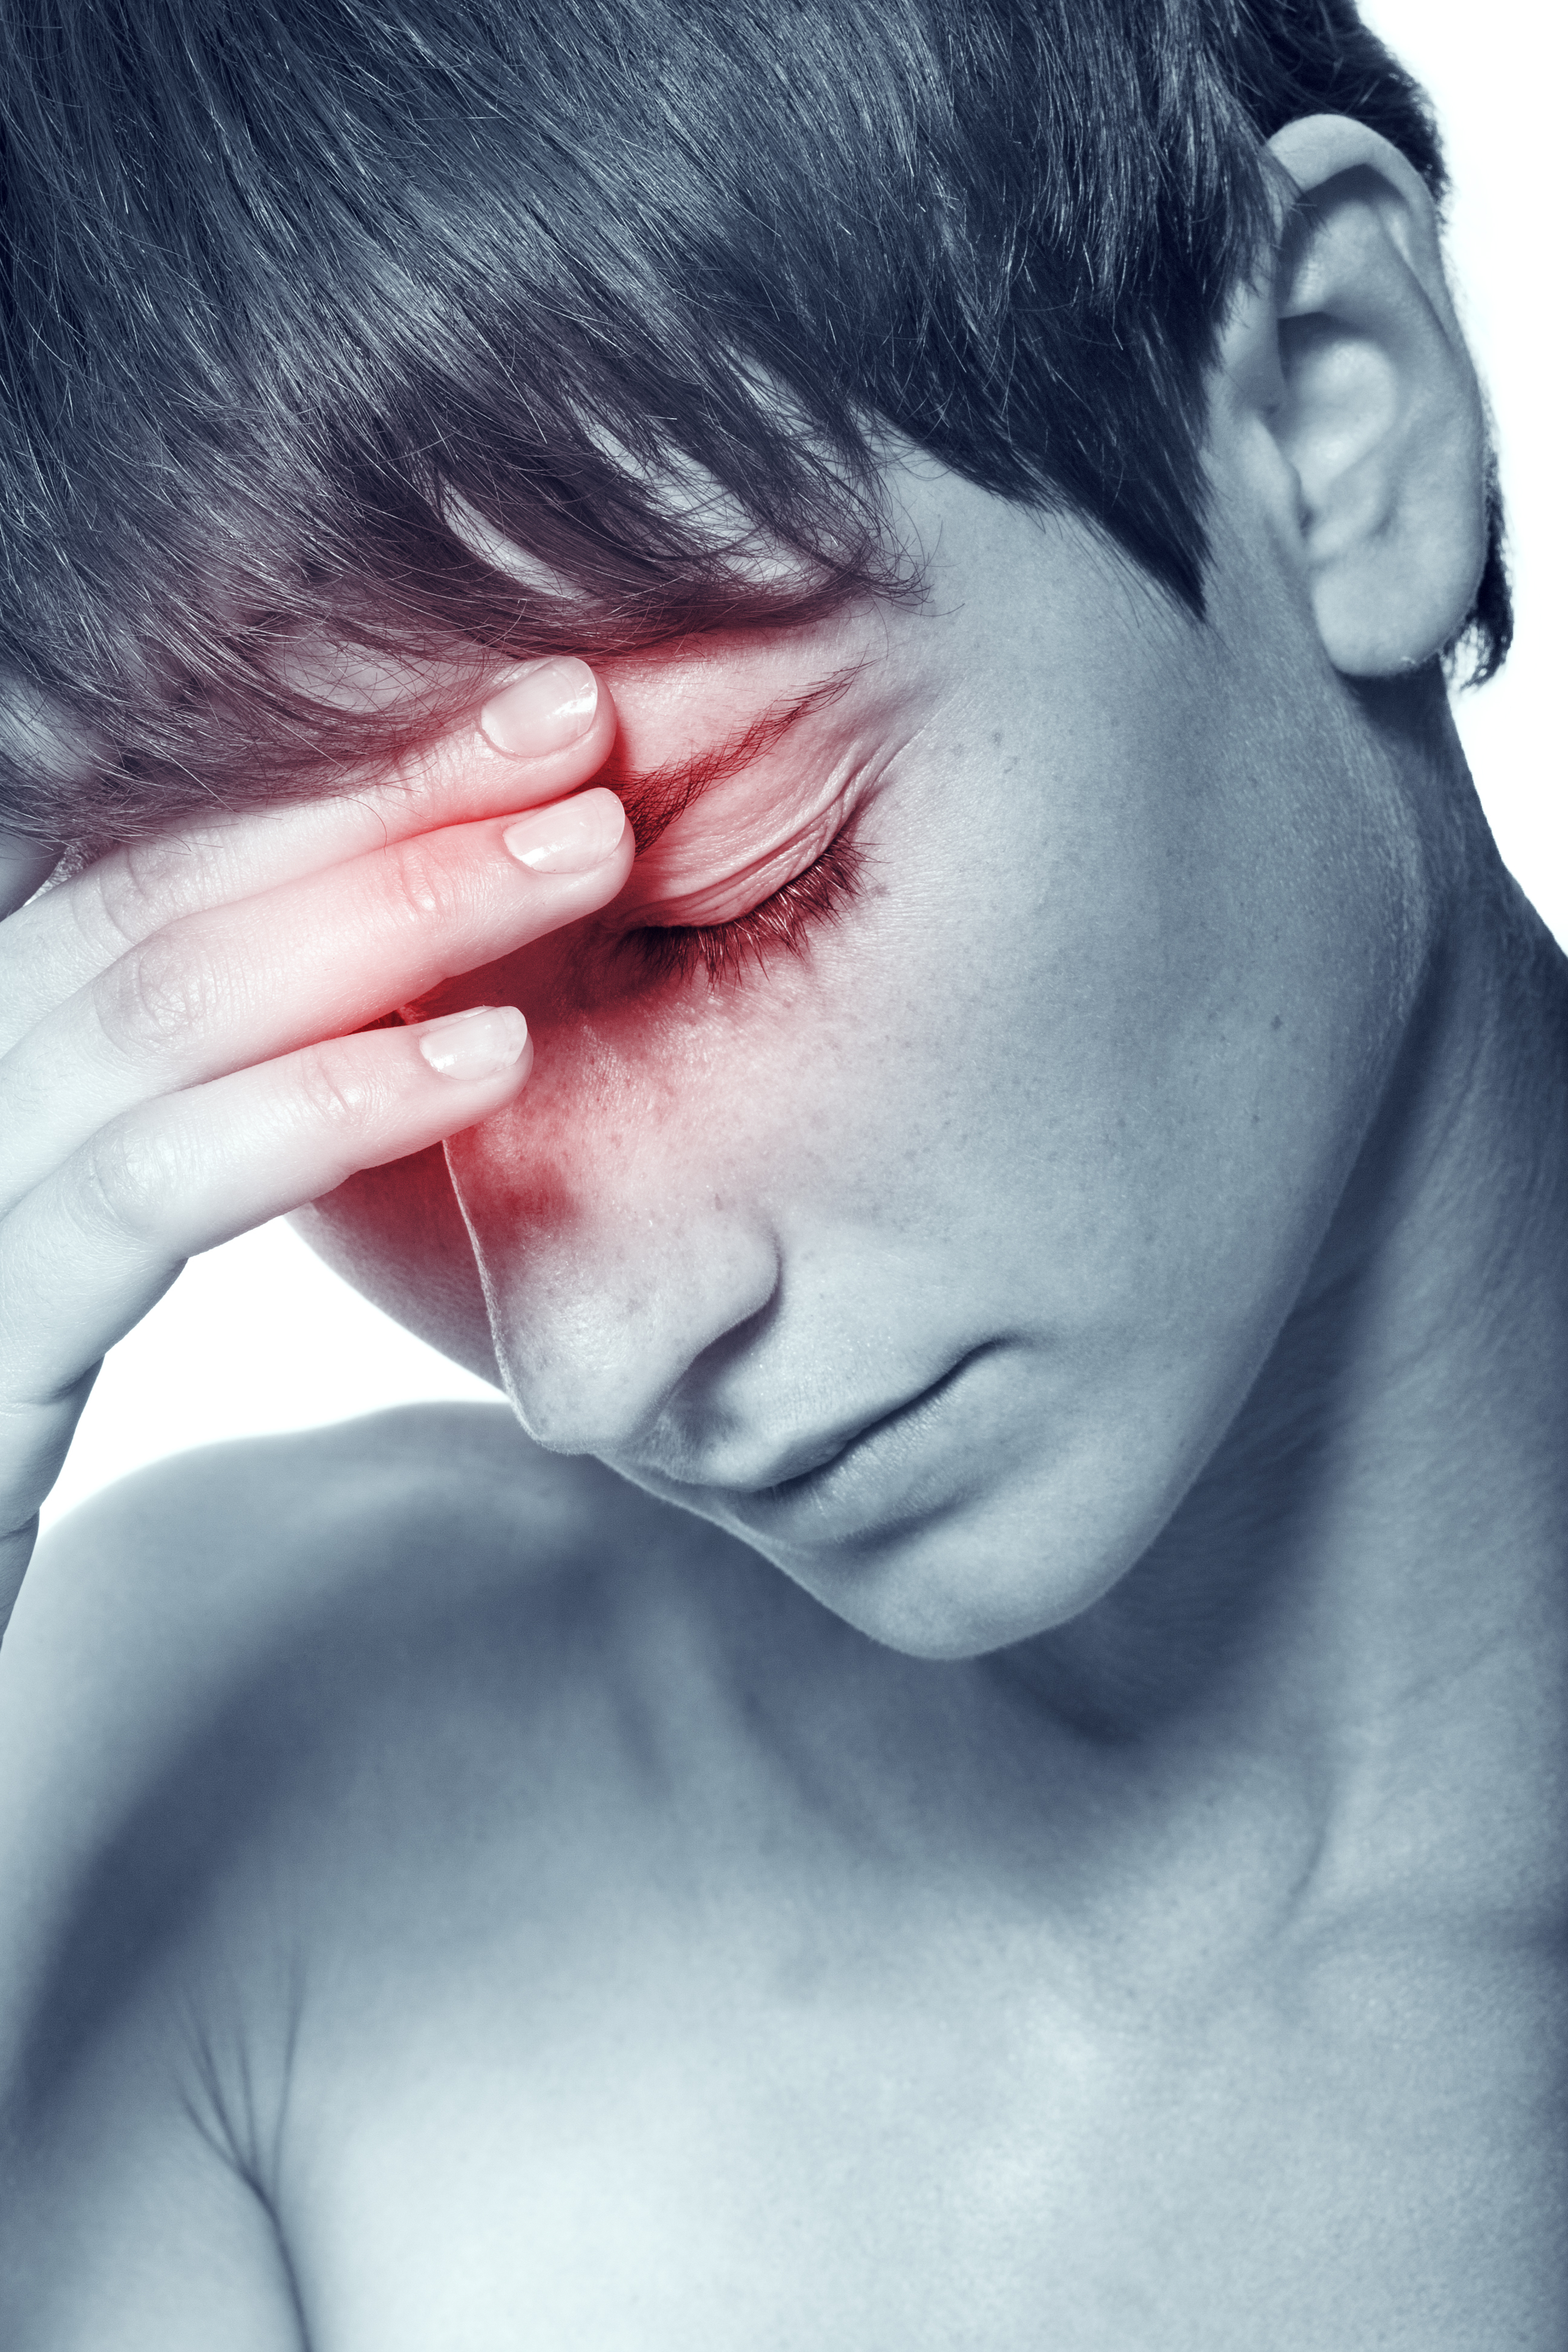 Researchers Find Reduced Interoceptive Awareness in Women with Fibromyalgia Syndrome